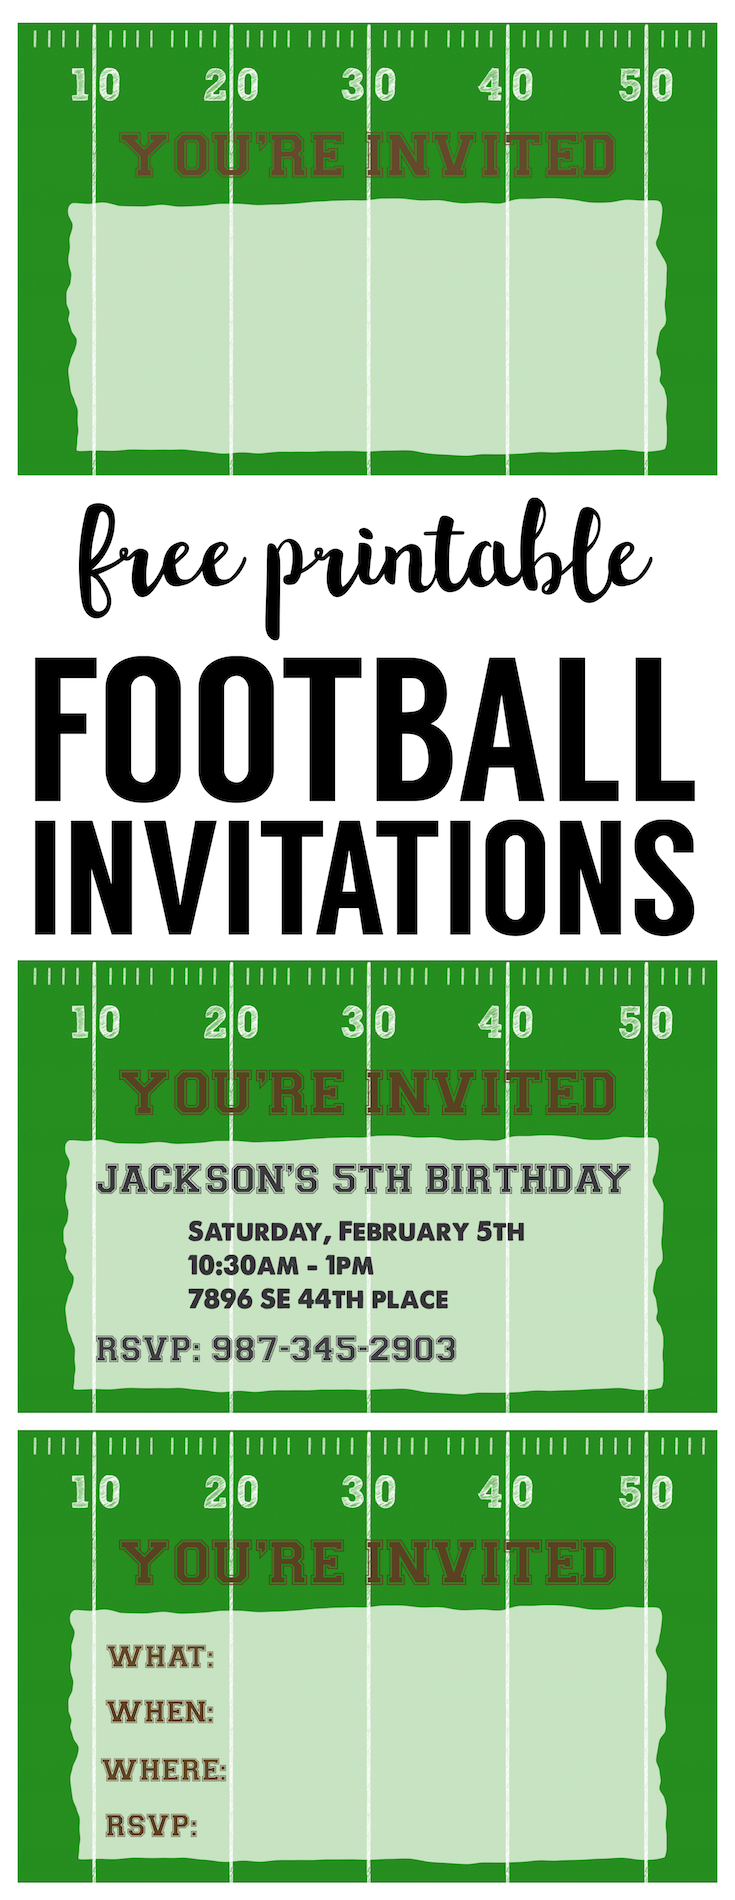 Football Party Invitation Template. Free Printable football invitations. Football party invites for a football birthday party, super bowl party, football themed baby shower, or team football party. 